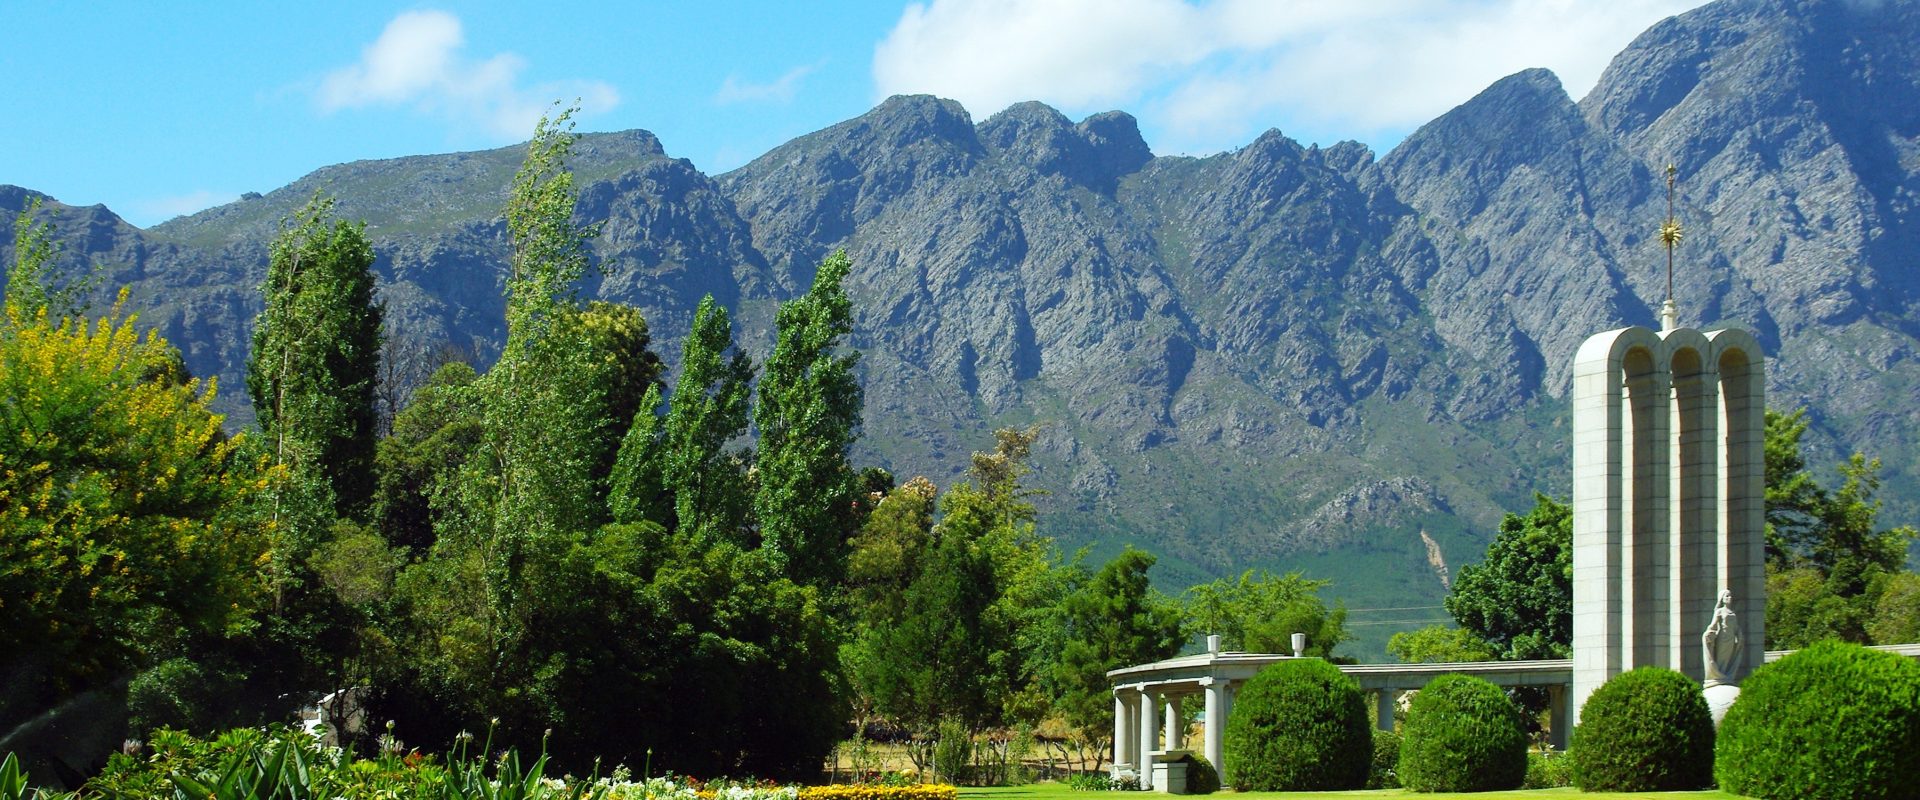 franschhoek monument and mountain in the background